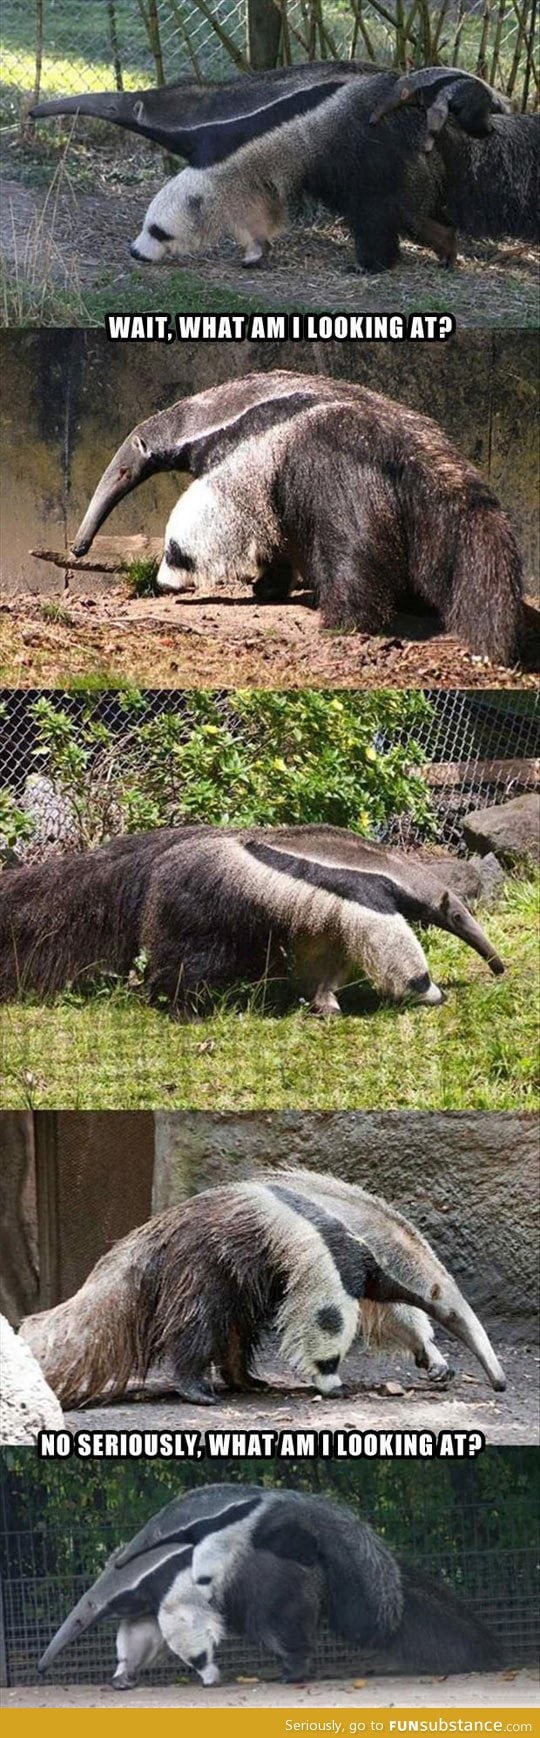 Anteaters are hard to figure out